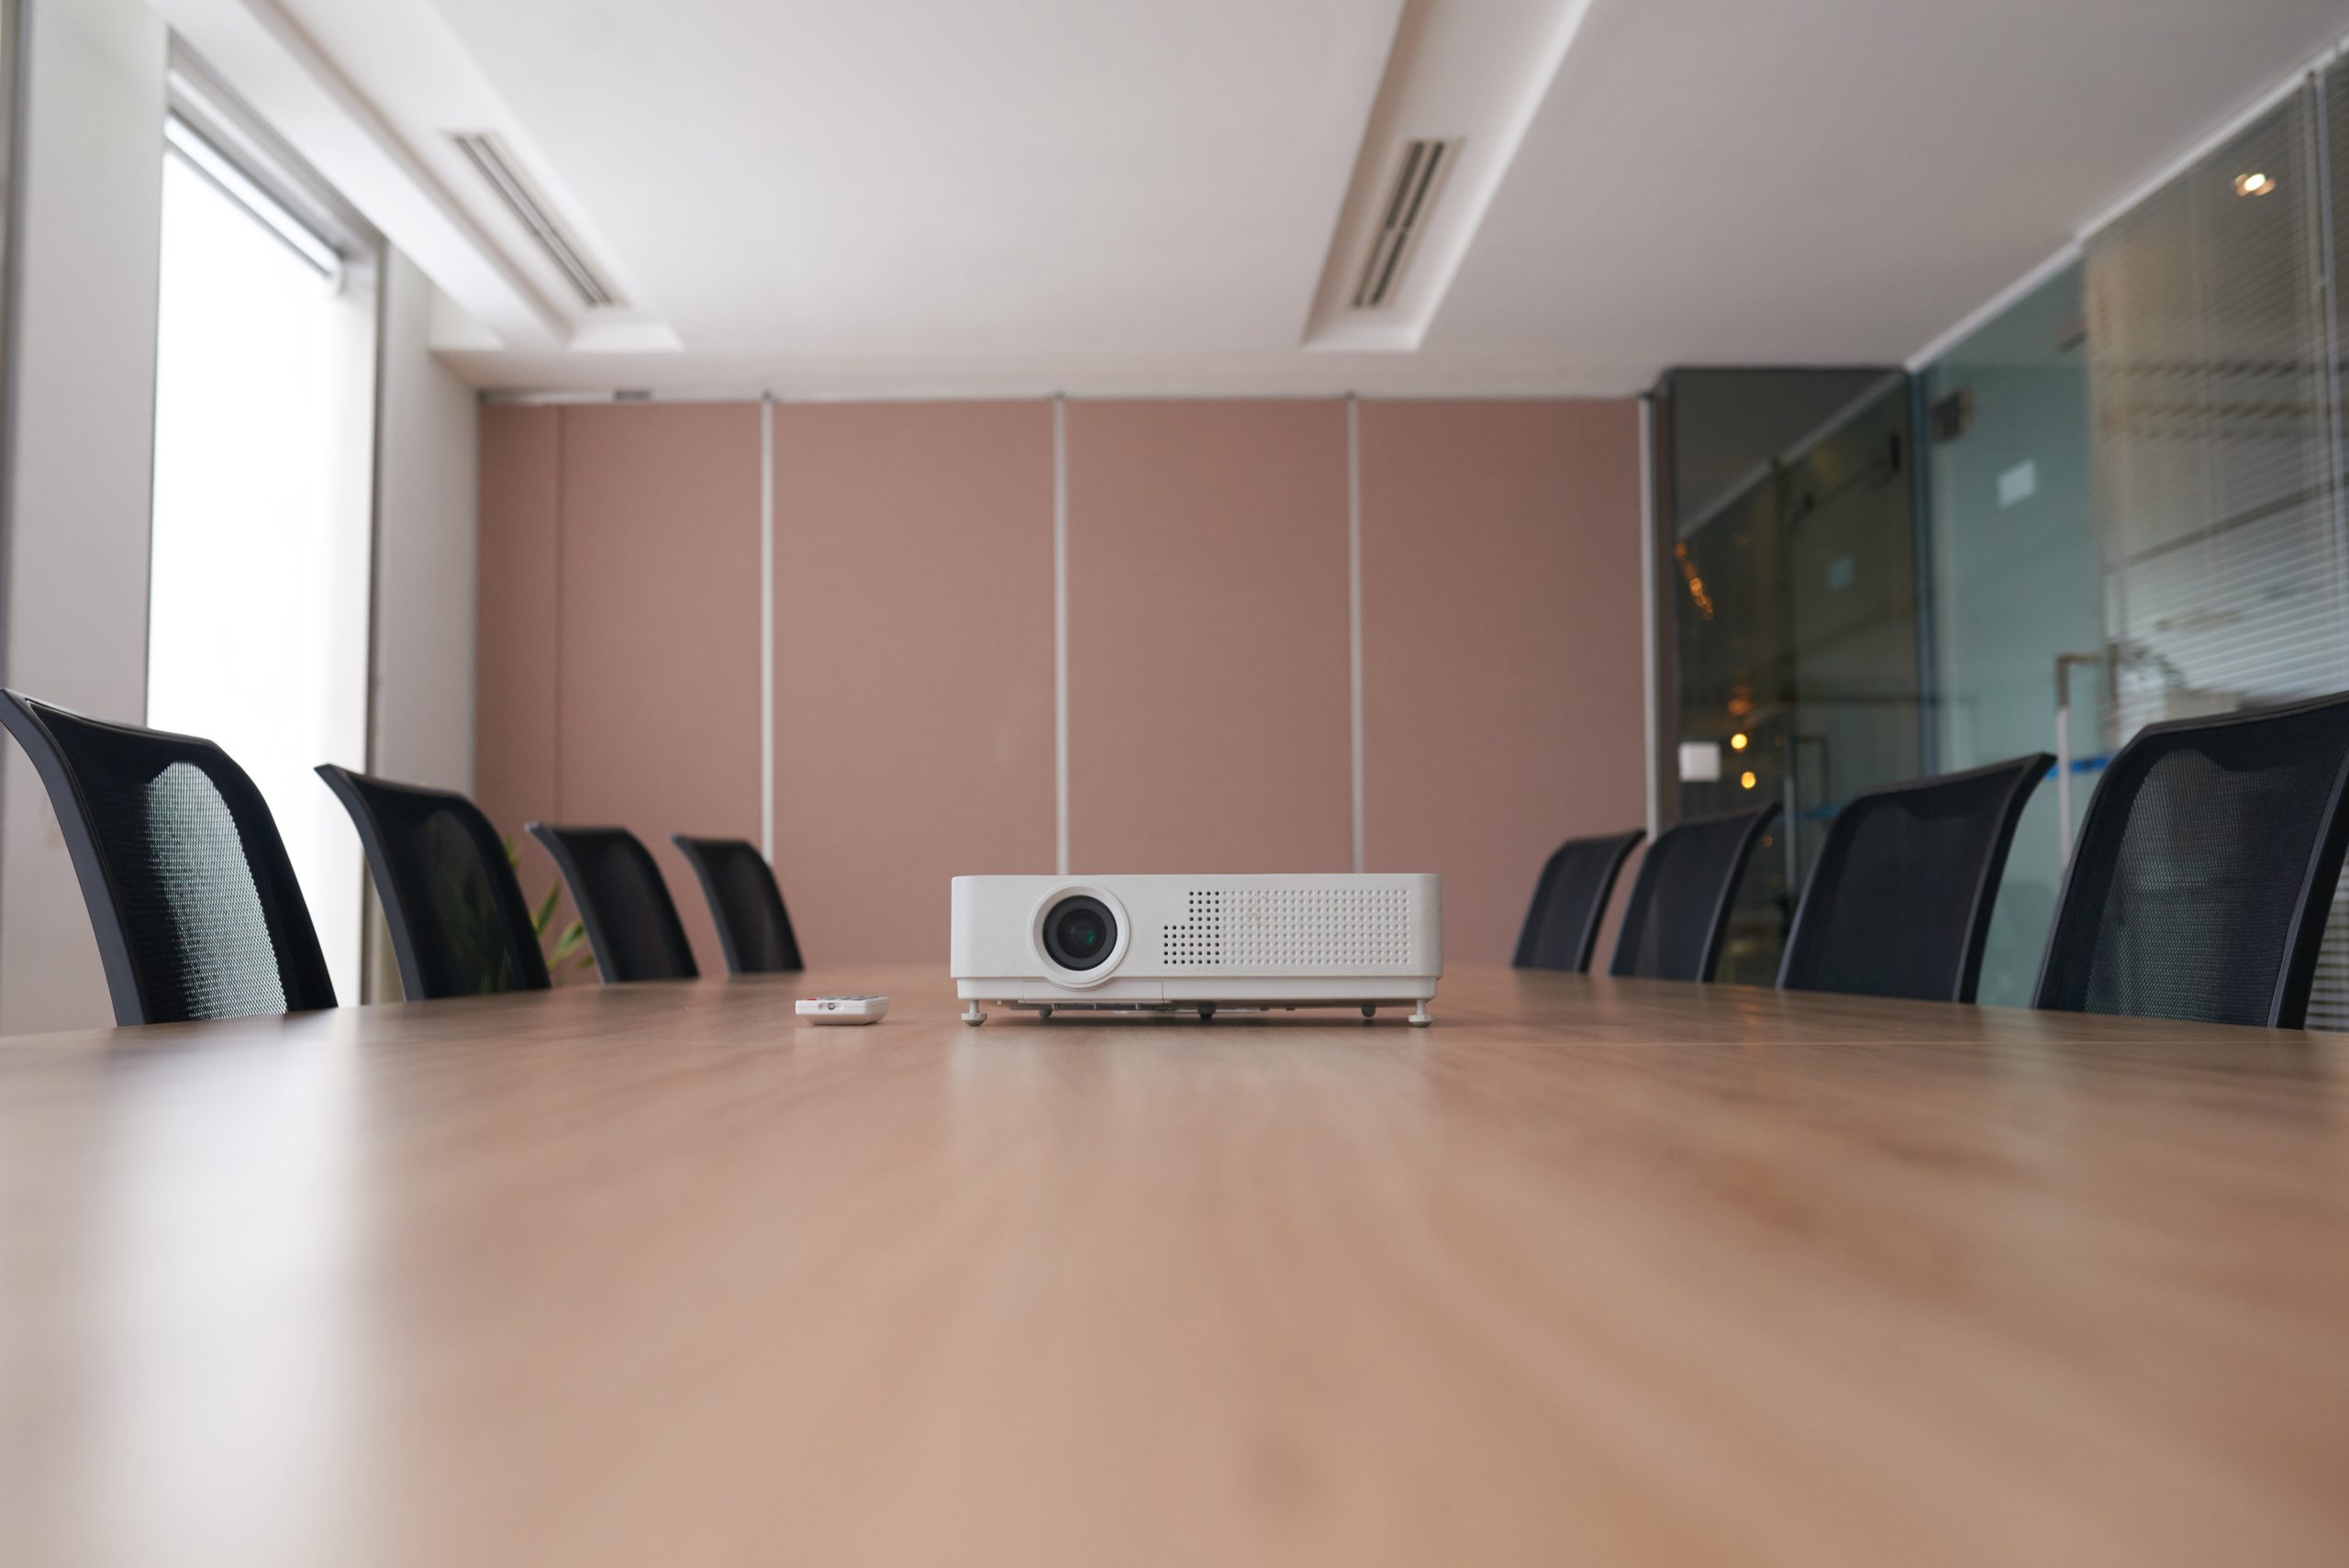 Projector on empty table in meeting room